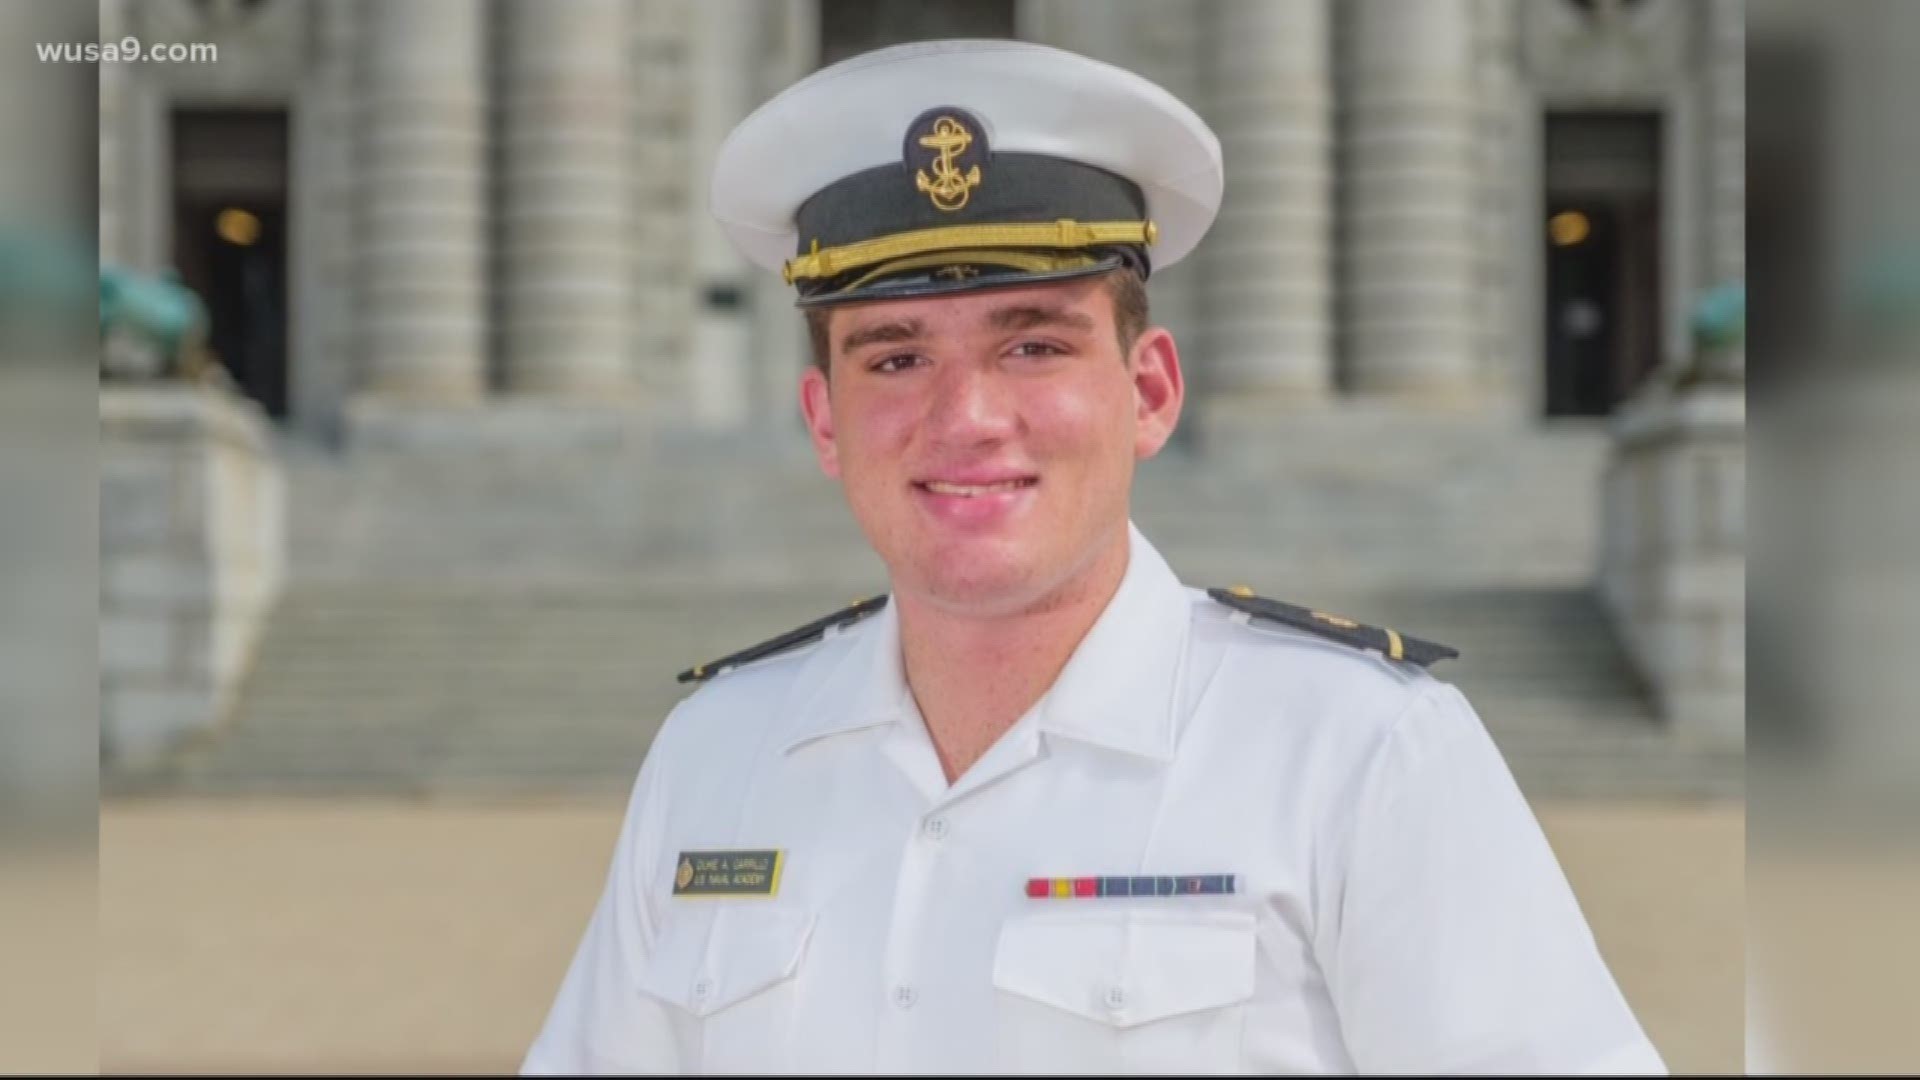 The Naval Academy announced that a midshipman died on Saturday in Annapolis during its semiannual physical readiness test.